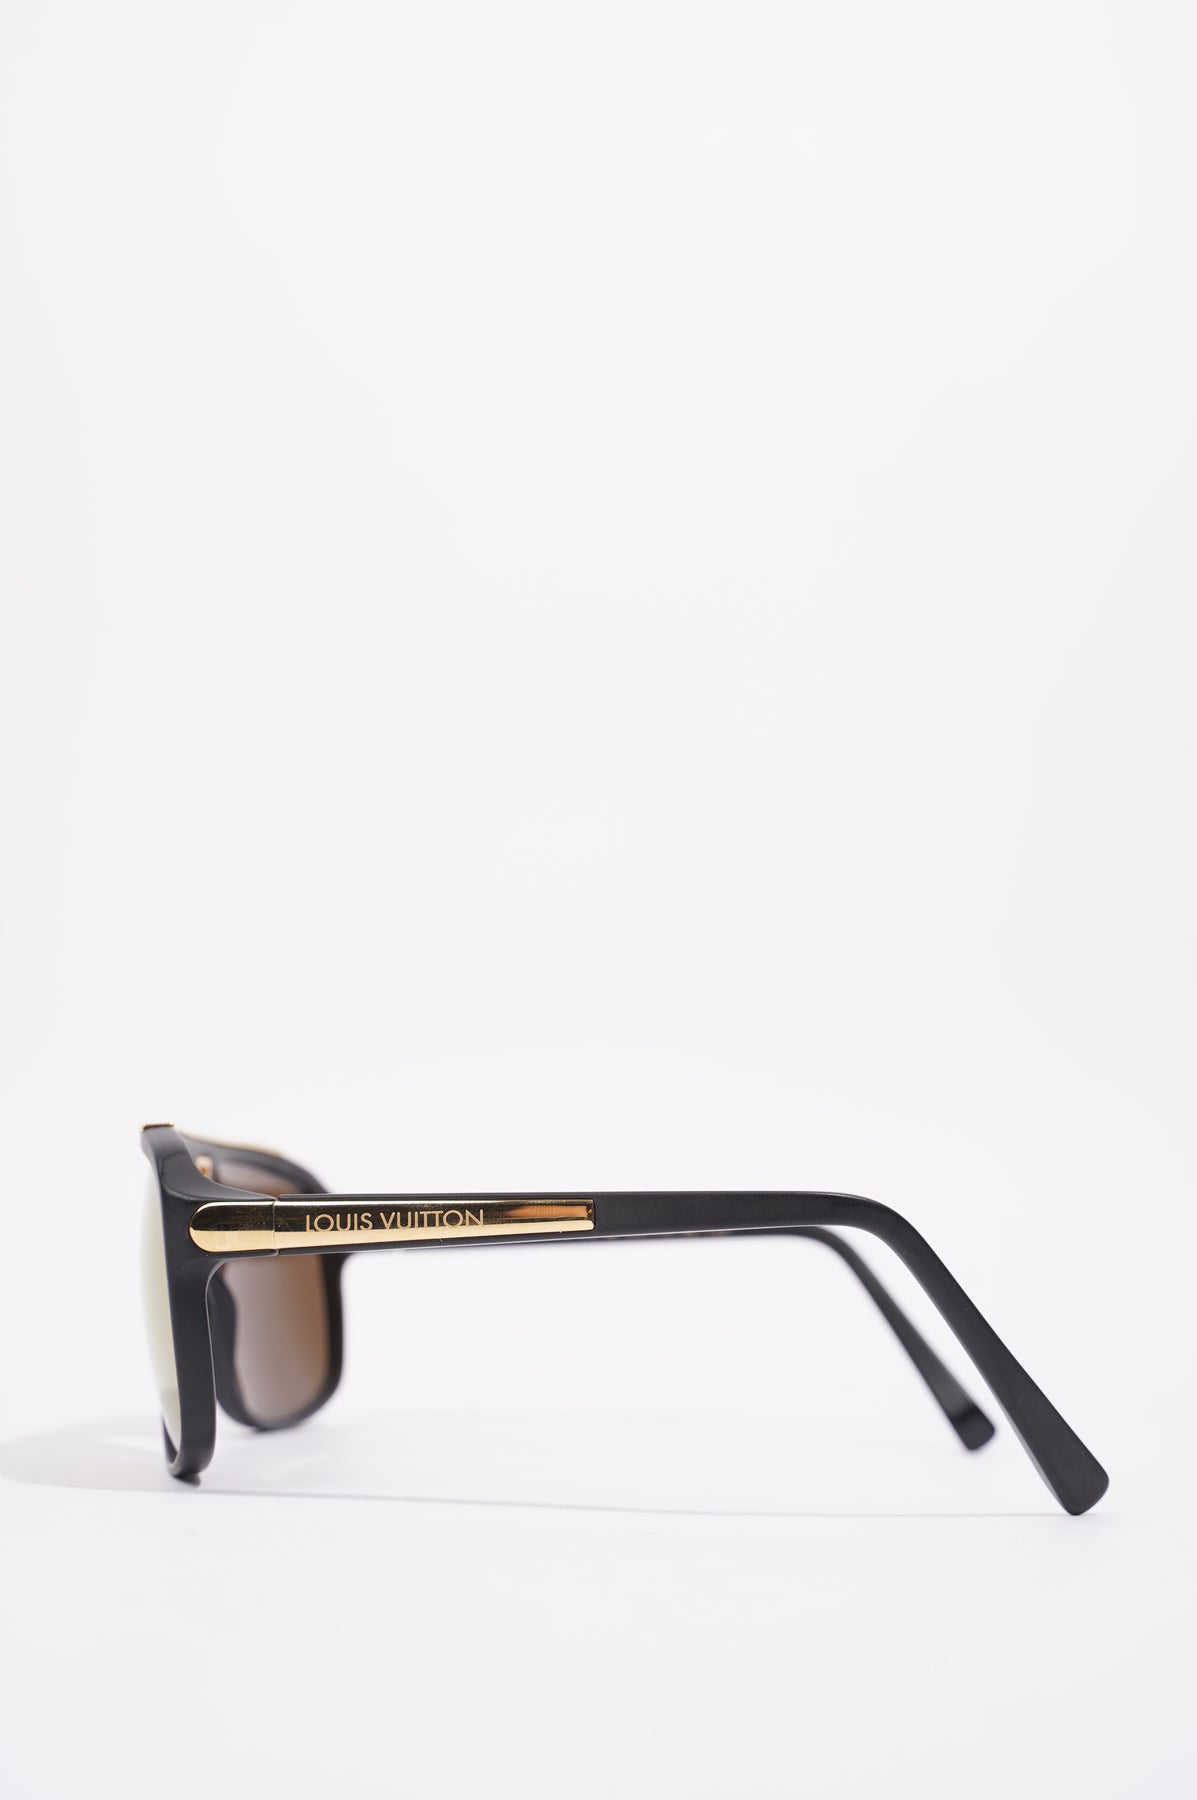 Sunglasses Louis Vuitton Black in Other - 22426067